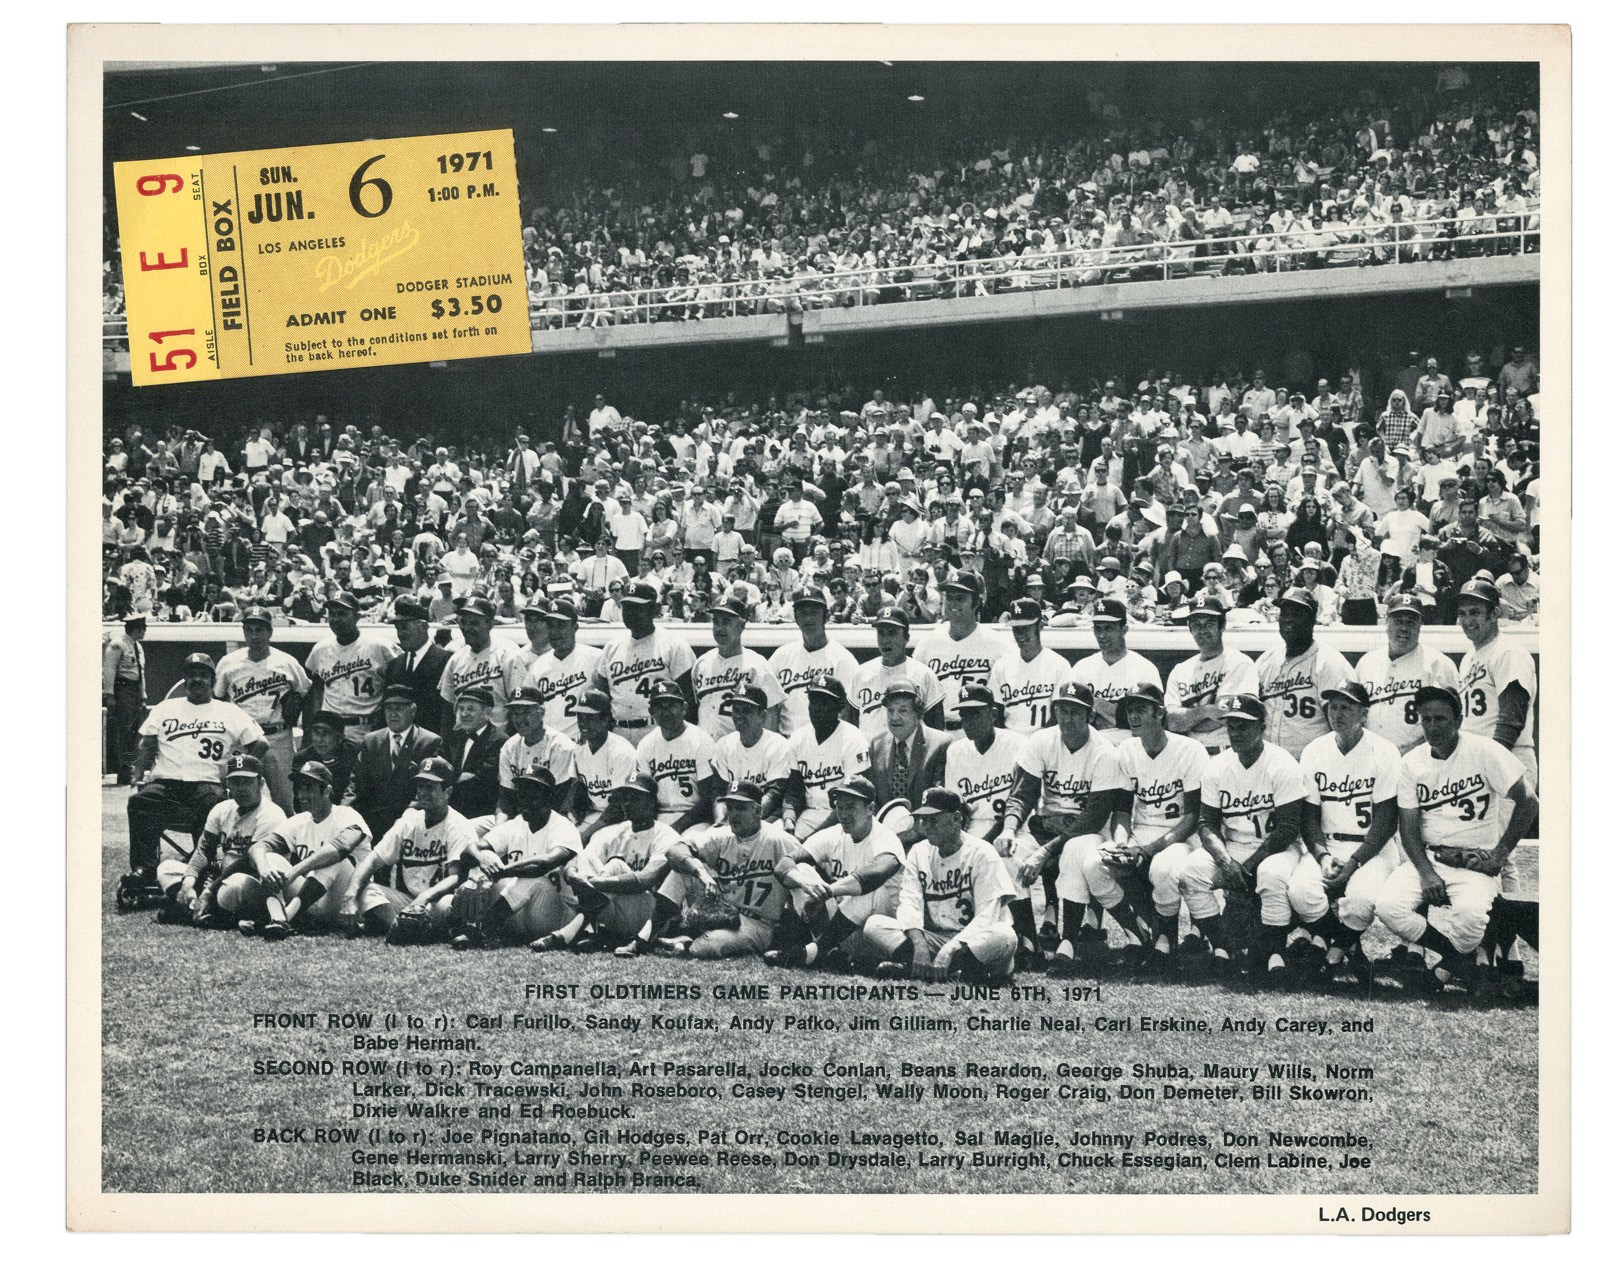 Jackie Robinson & Brooklyn Dodgers - First Ever Dodgers Old Timer's Game Ticket & Photo